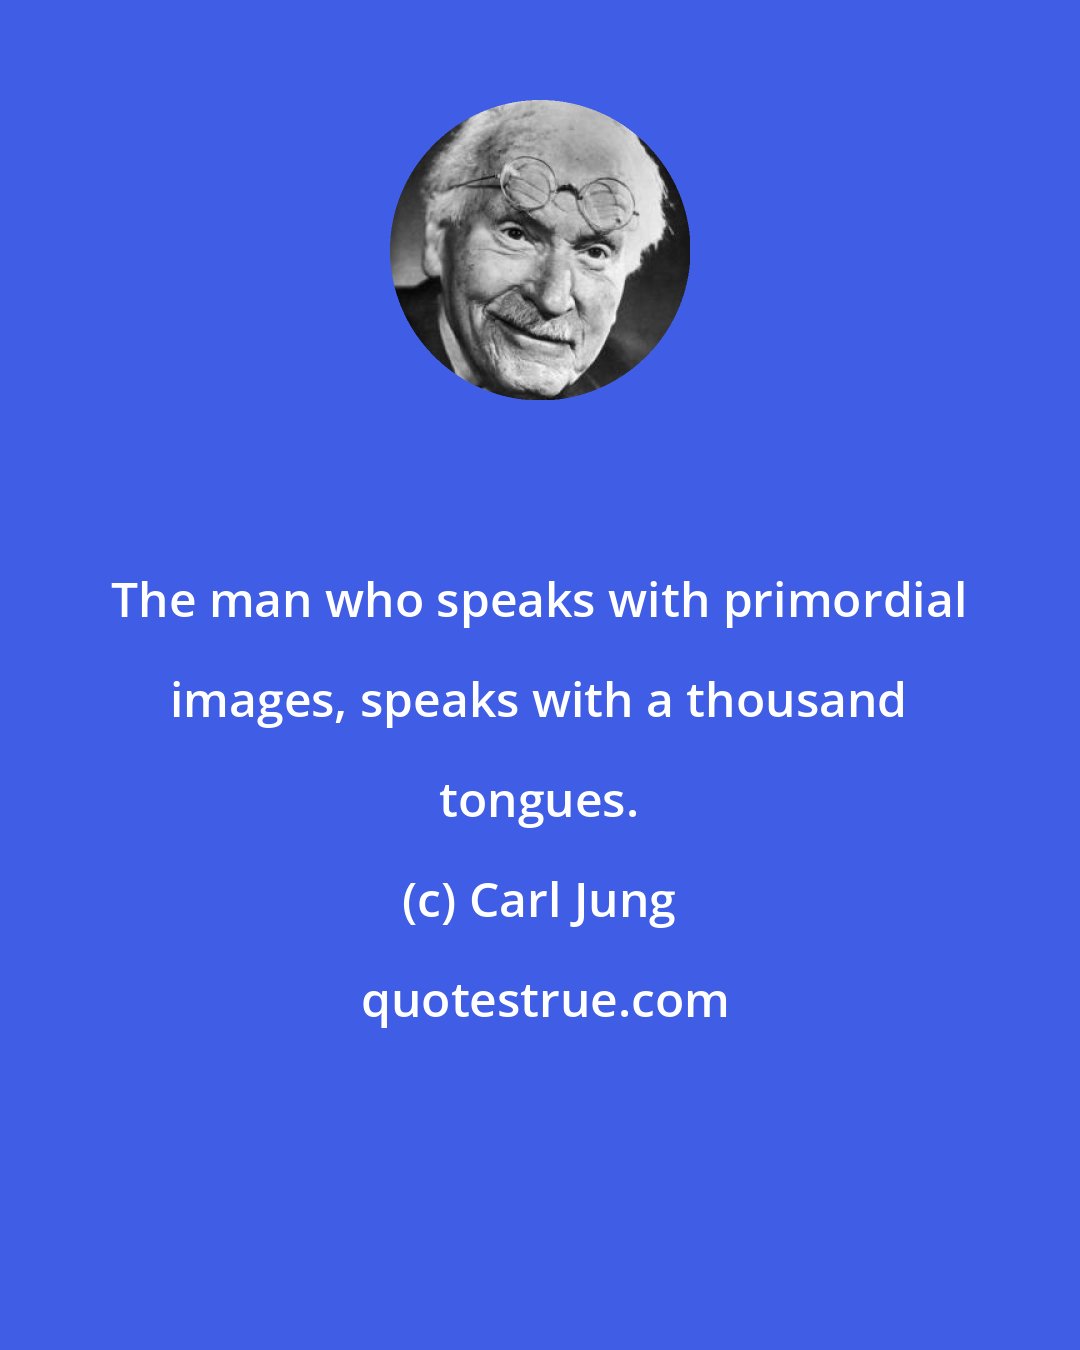 Carl Jung: The man who speaks with primordial images, speaks with a thousand tongues.